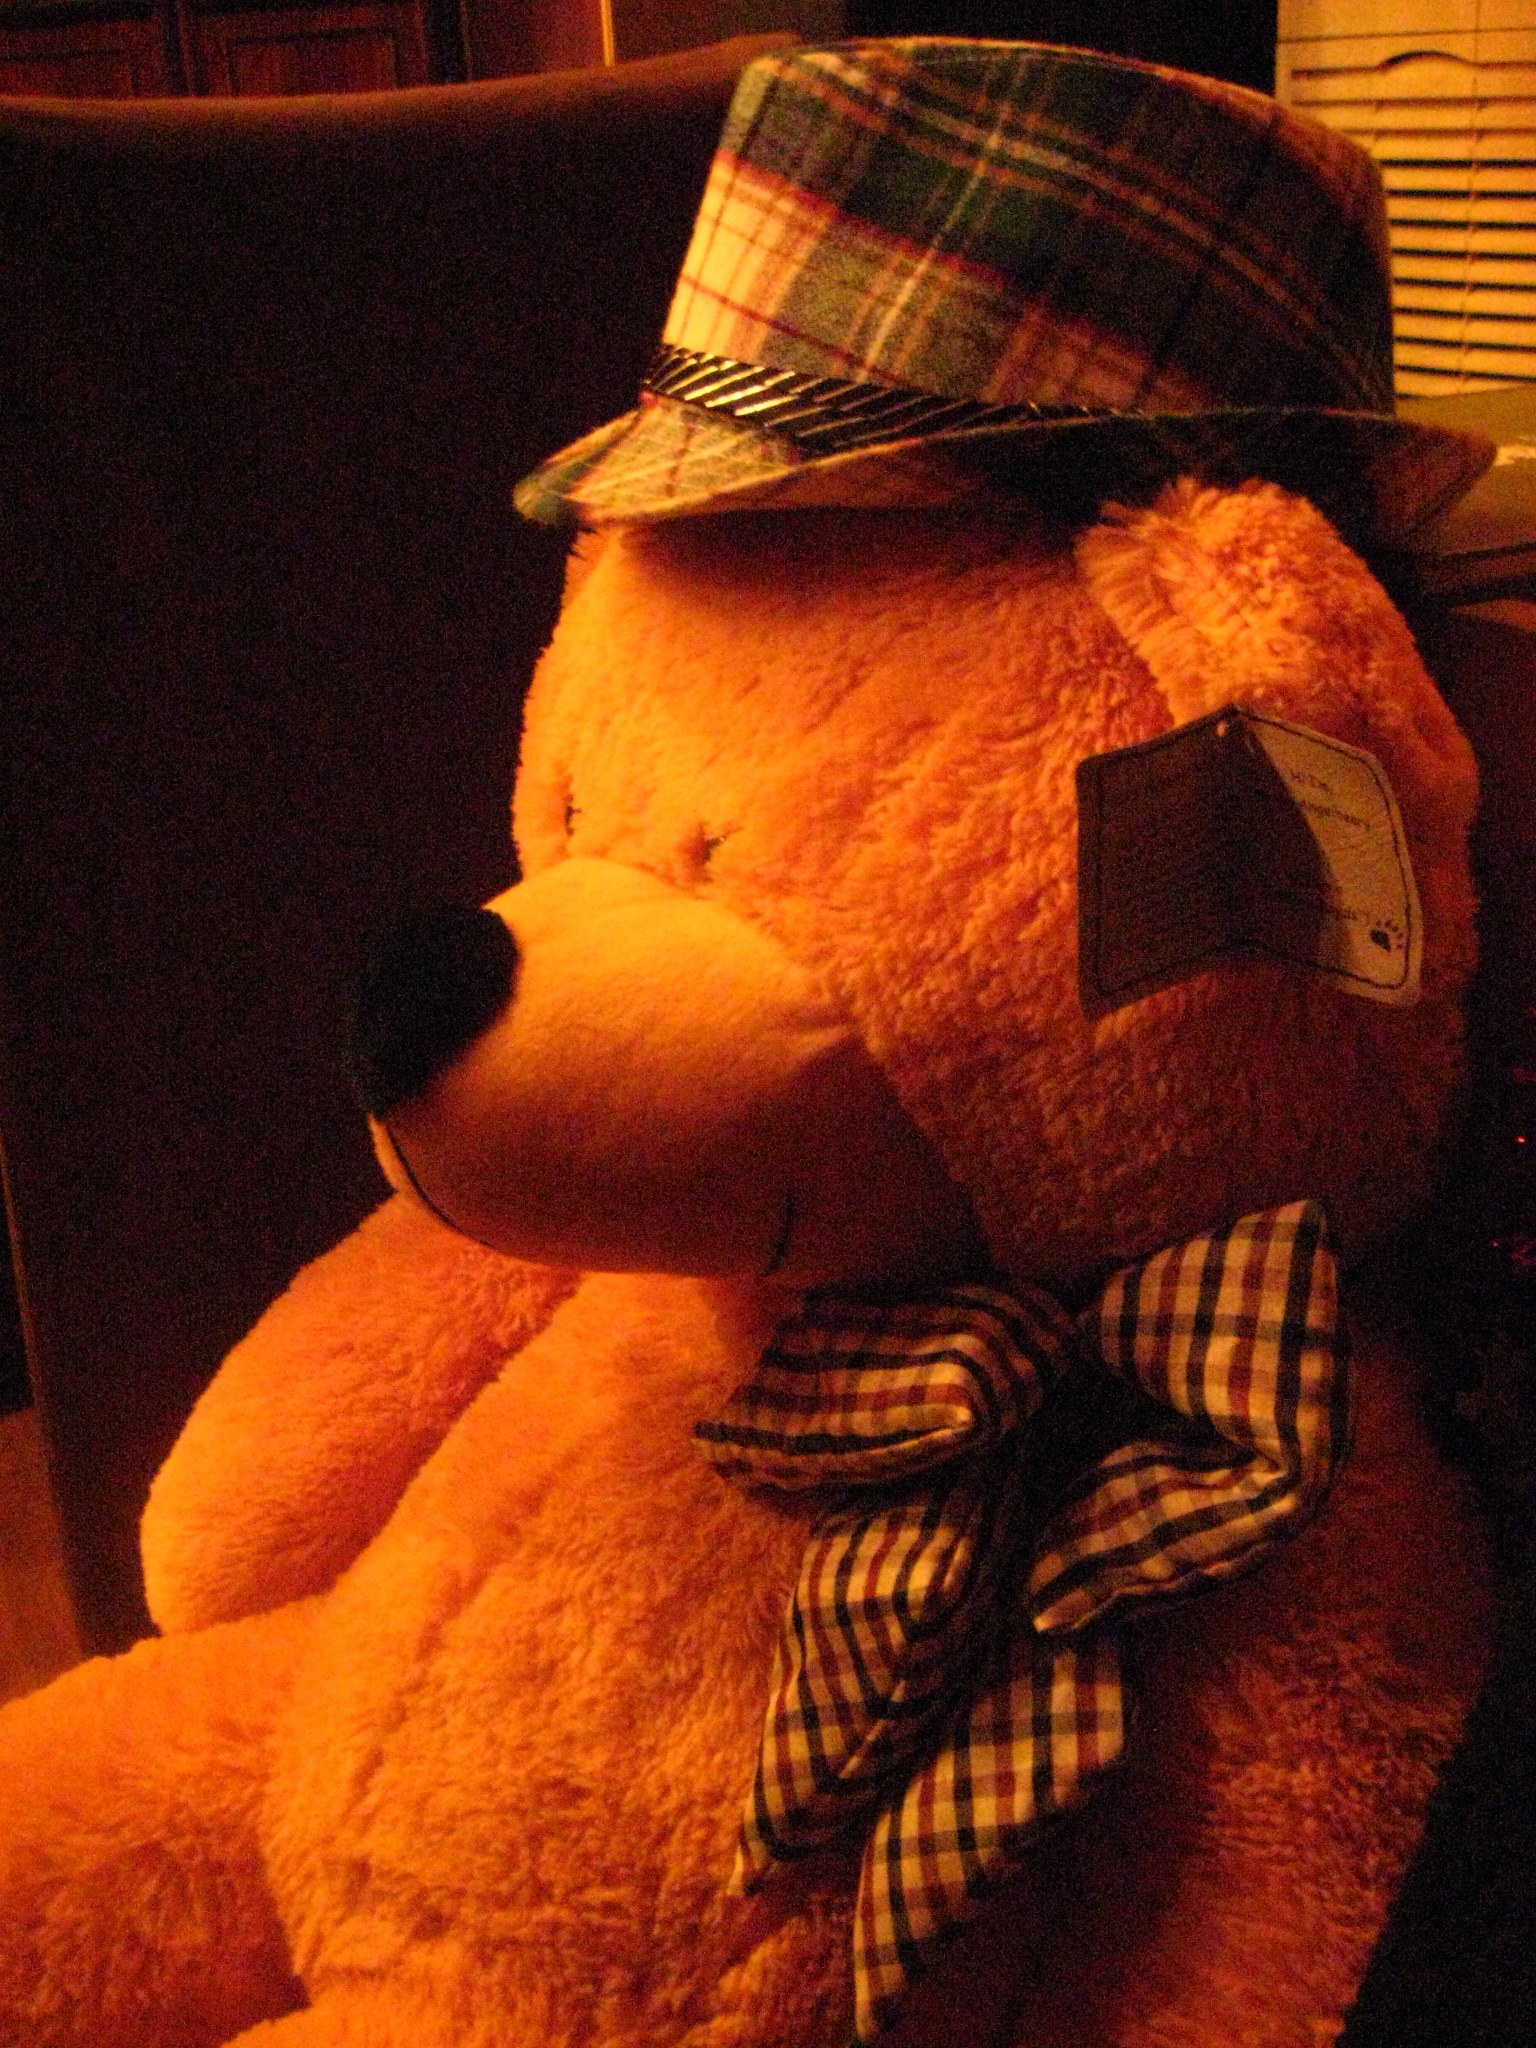 Ain’t I a Bear? Gerald the Bear Tackles Authenticity and Place